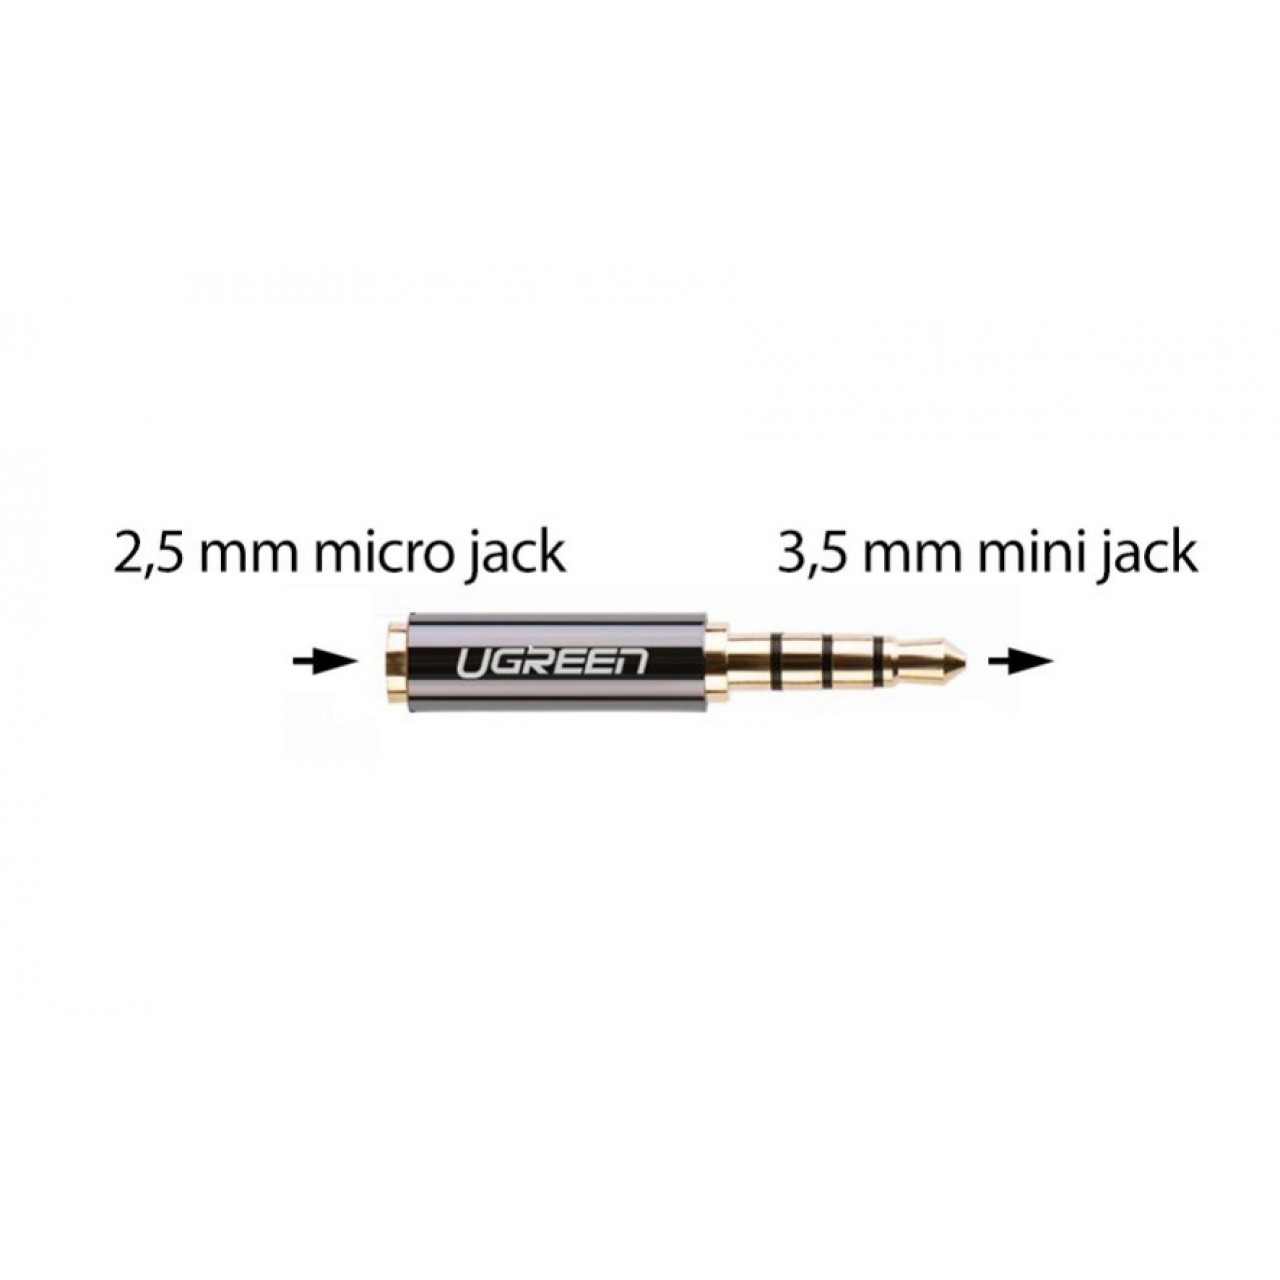 Ugreen adapter from 2,5 mm micro jack female to 3,5 mm mini jack male black 20502 - 5246